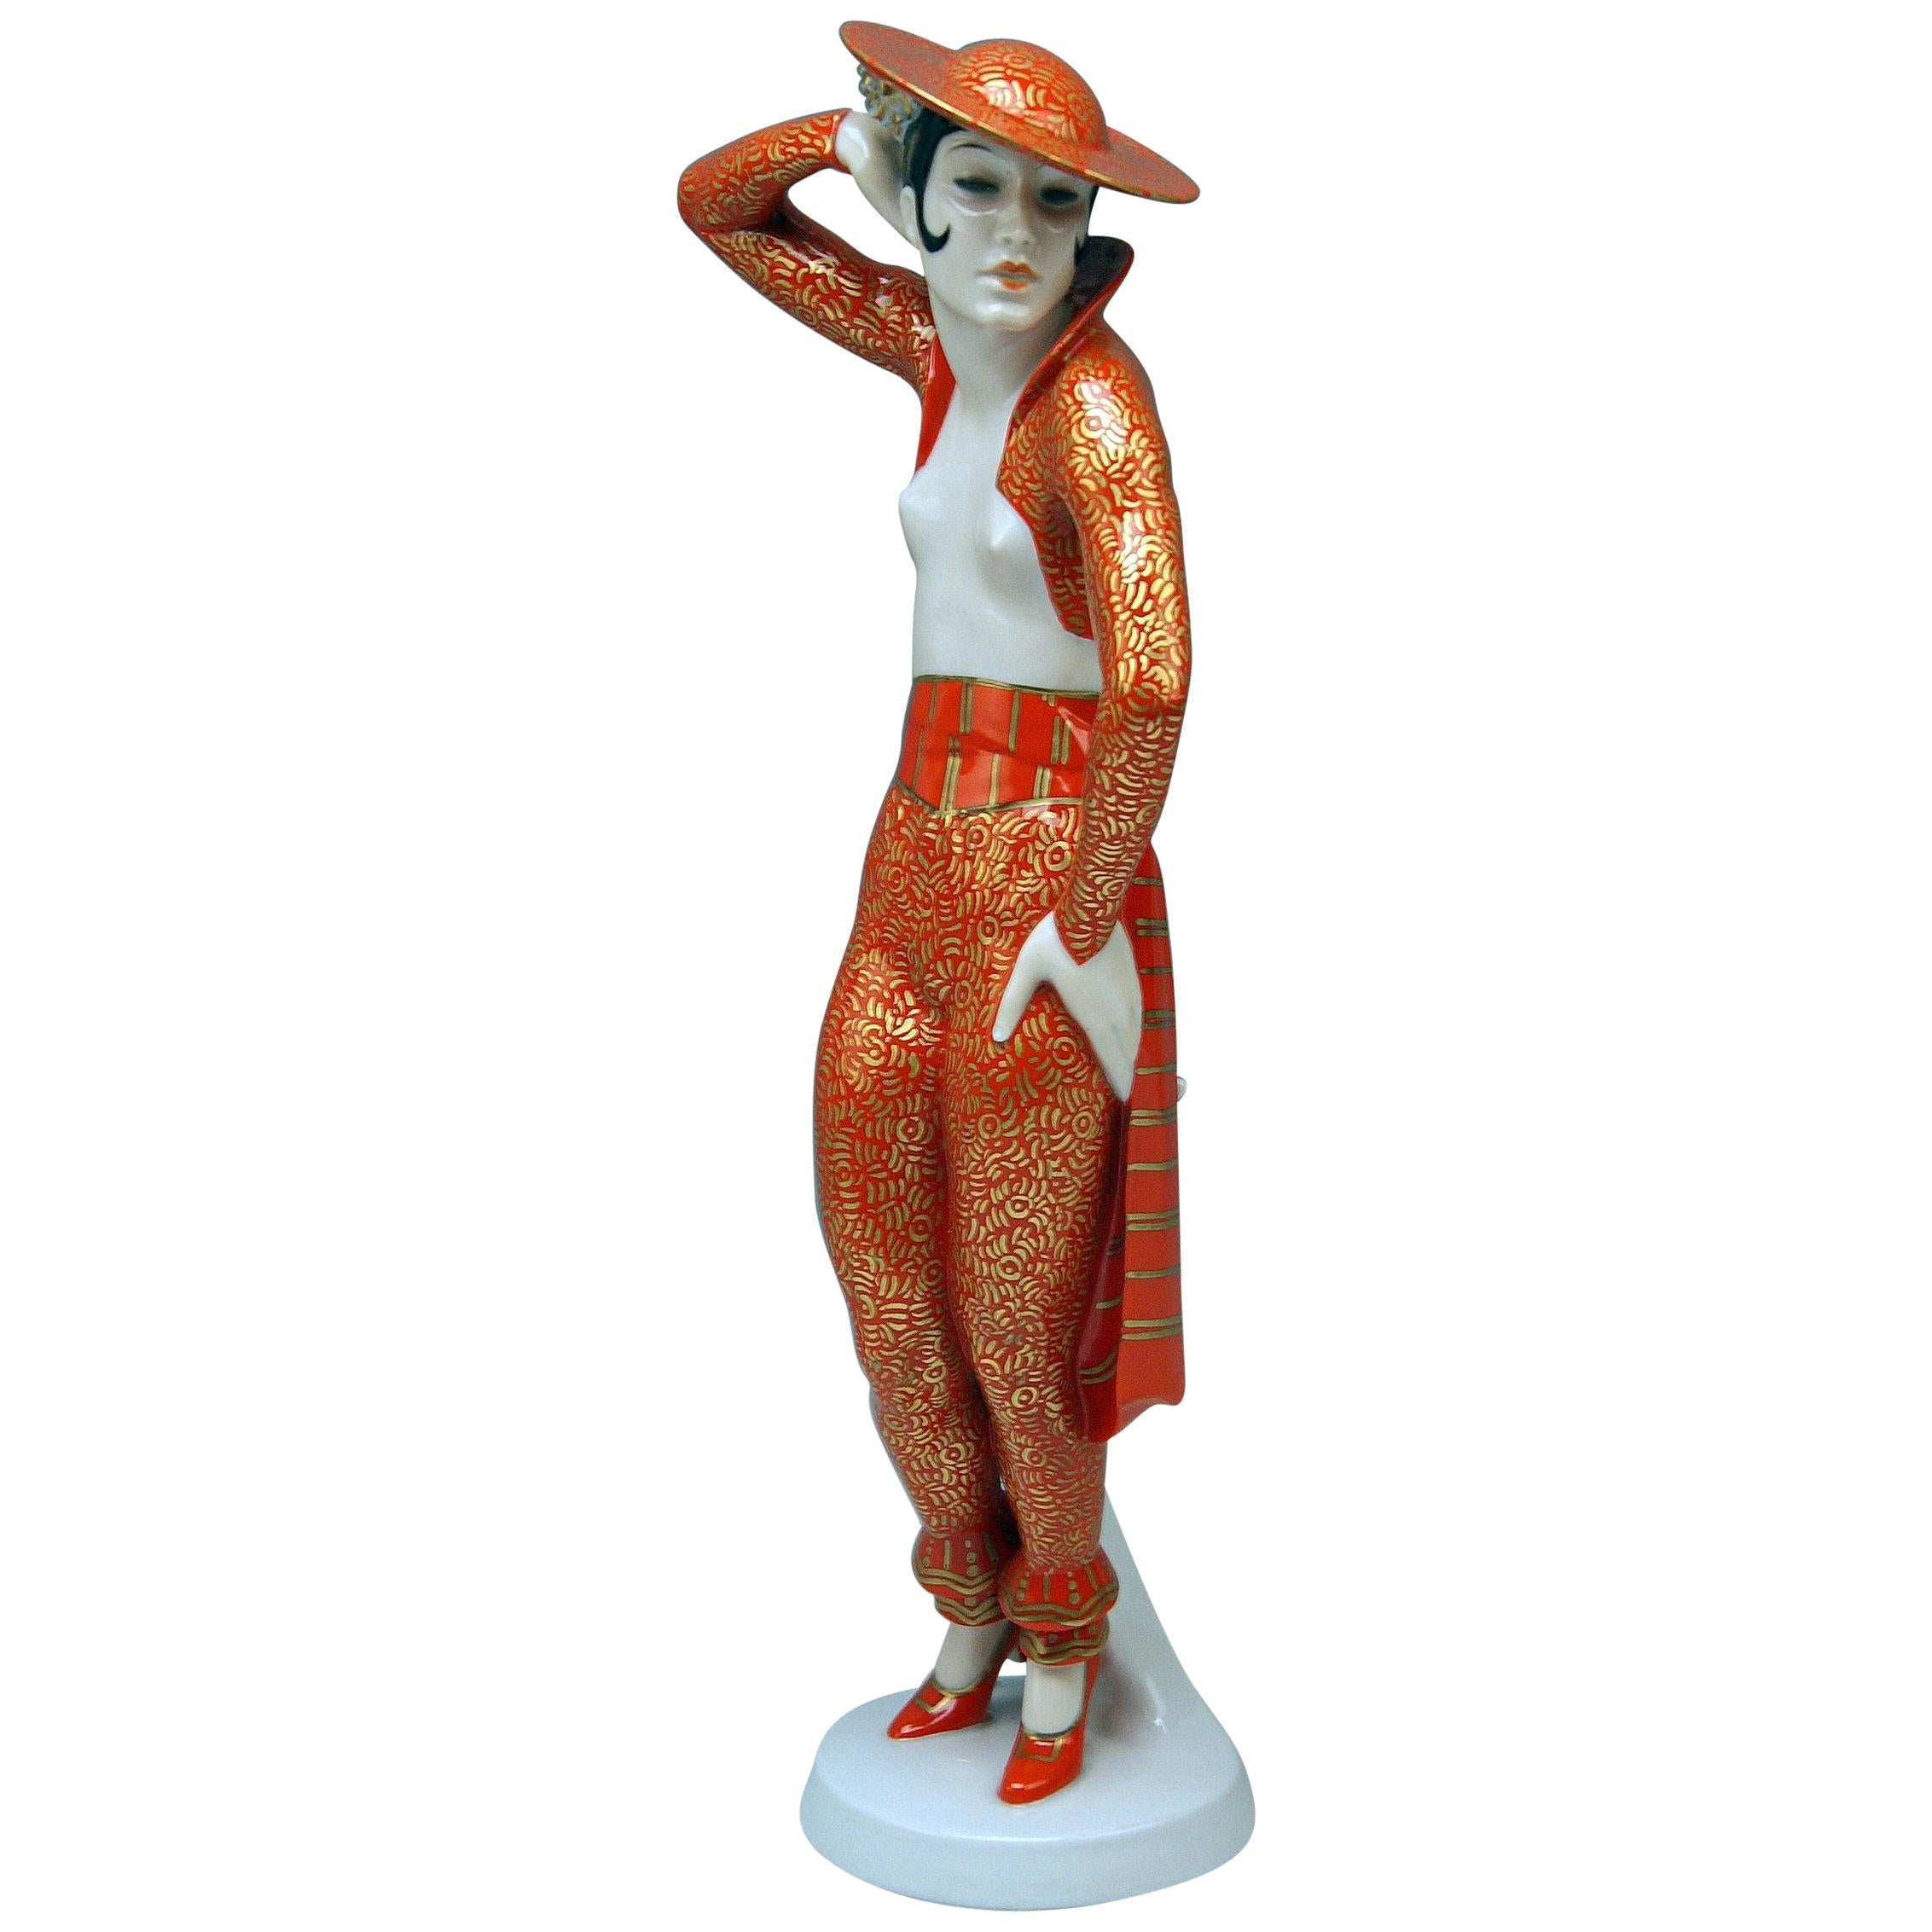 Rosenthal Spanish Lady Dancer Carmen Selb, Germany, 1934 - height  15.94 inches